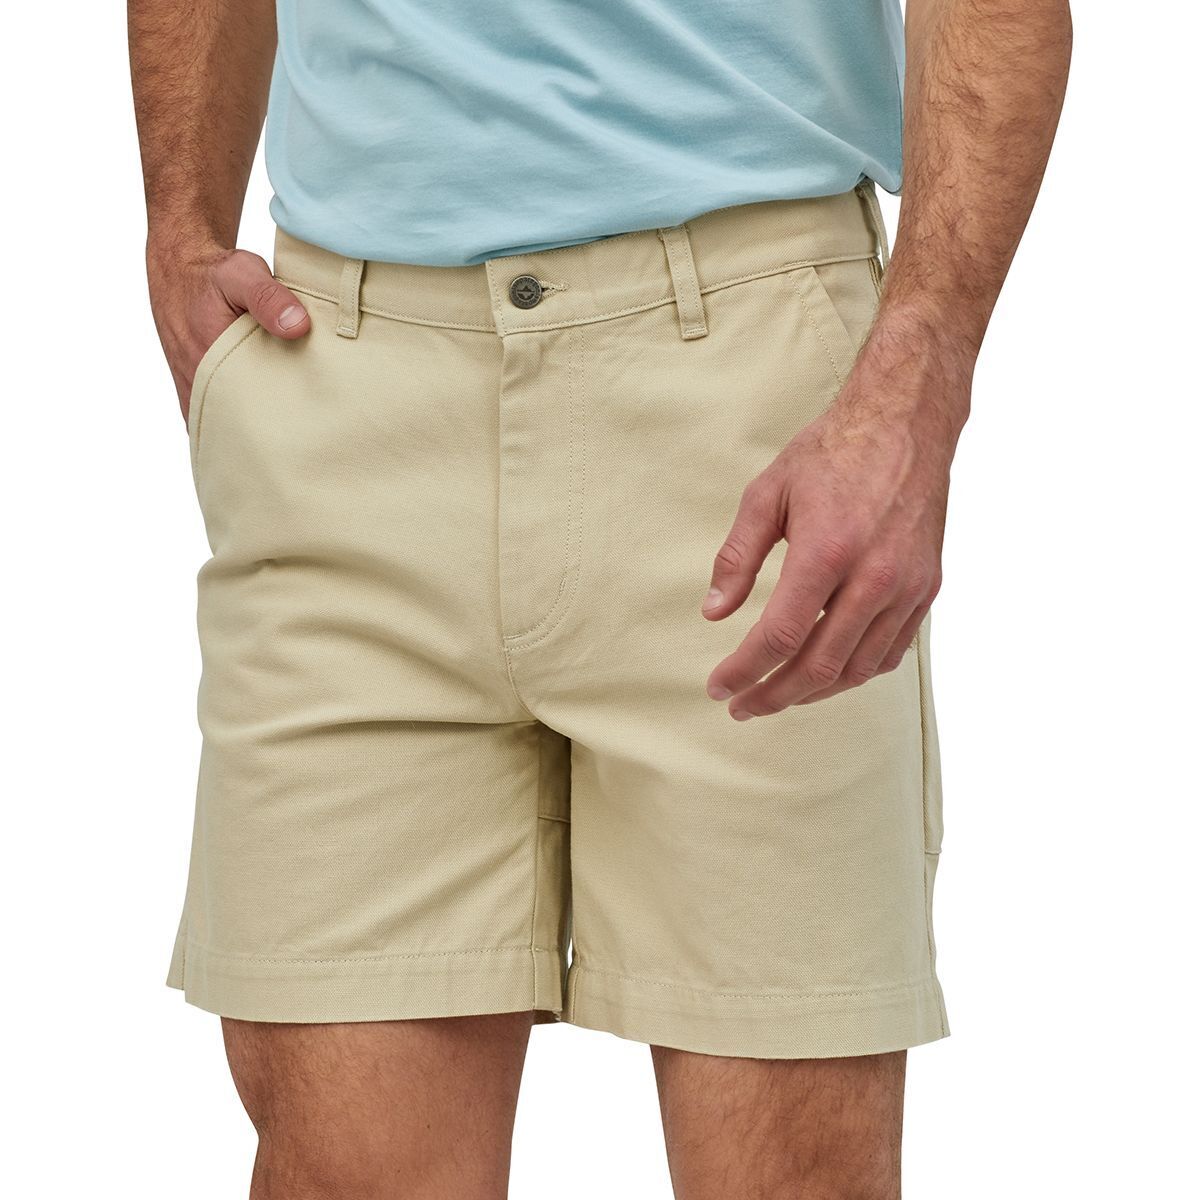 Patagonia Stand Up Short - Men's | Backcountry.com